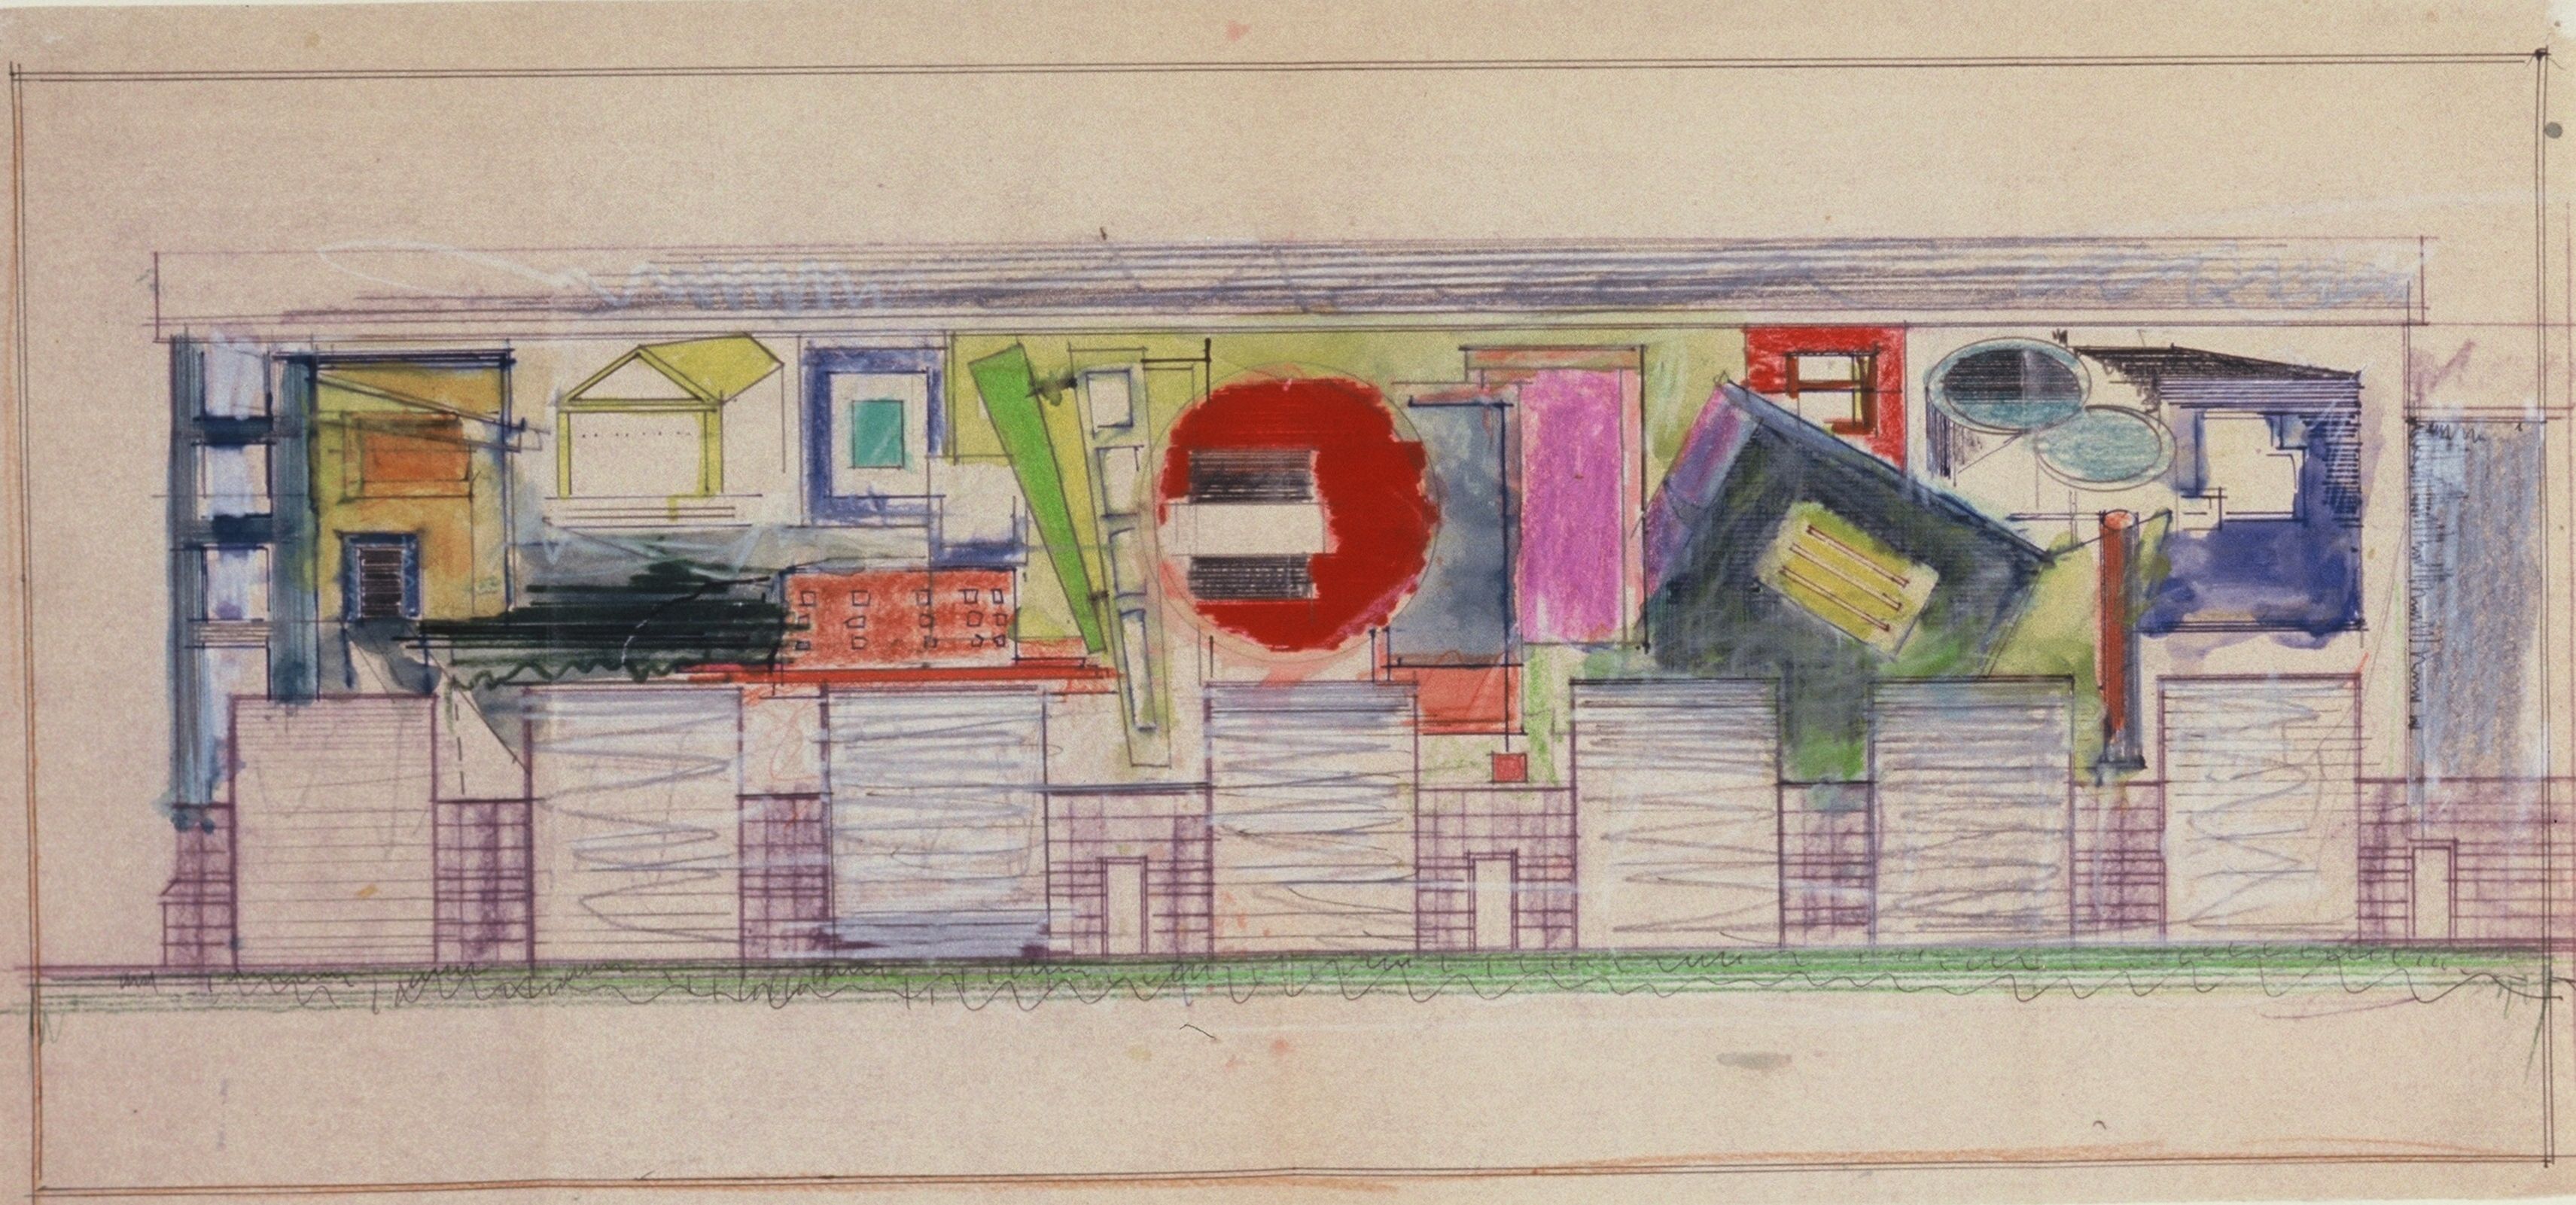 Study for Sewage Plant Mural  1987 